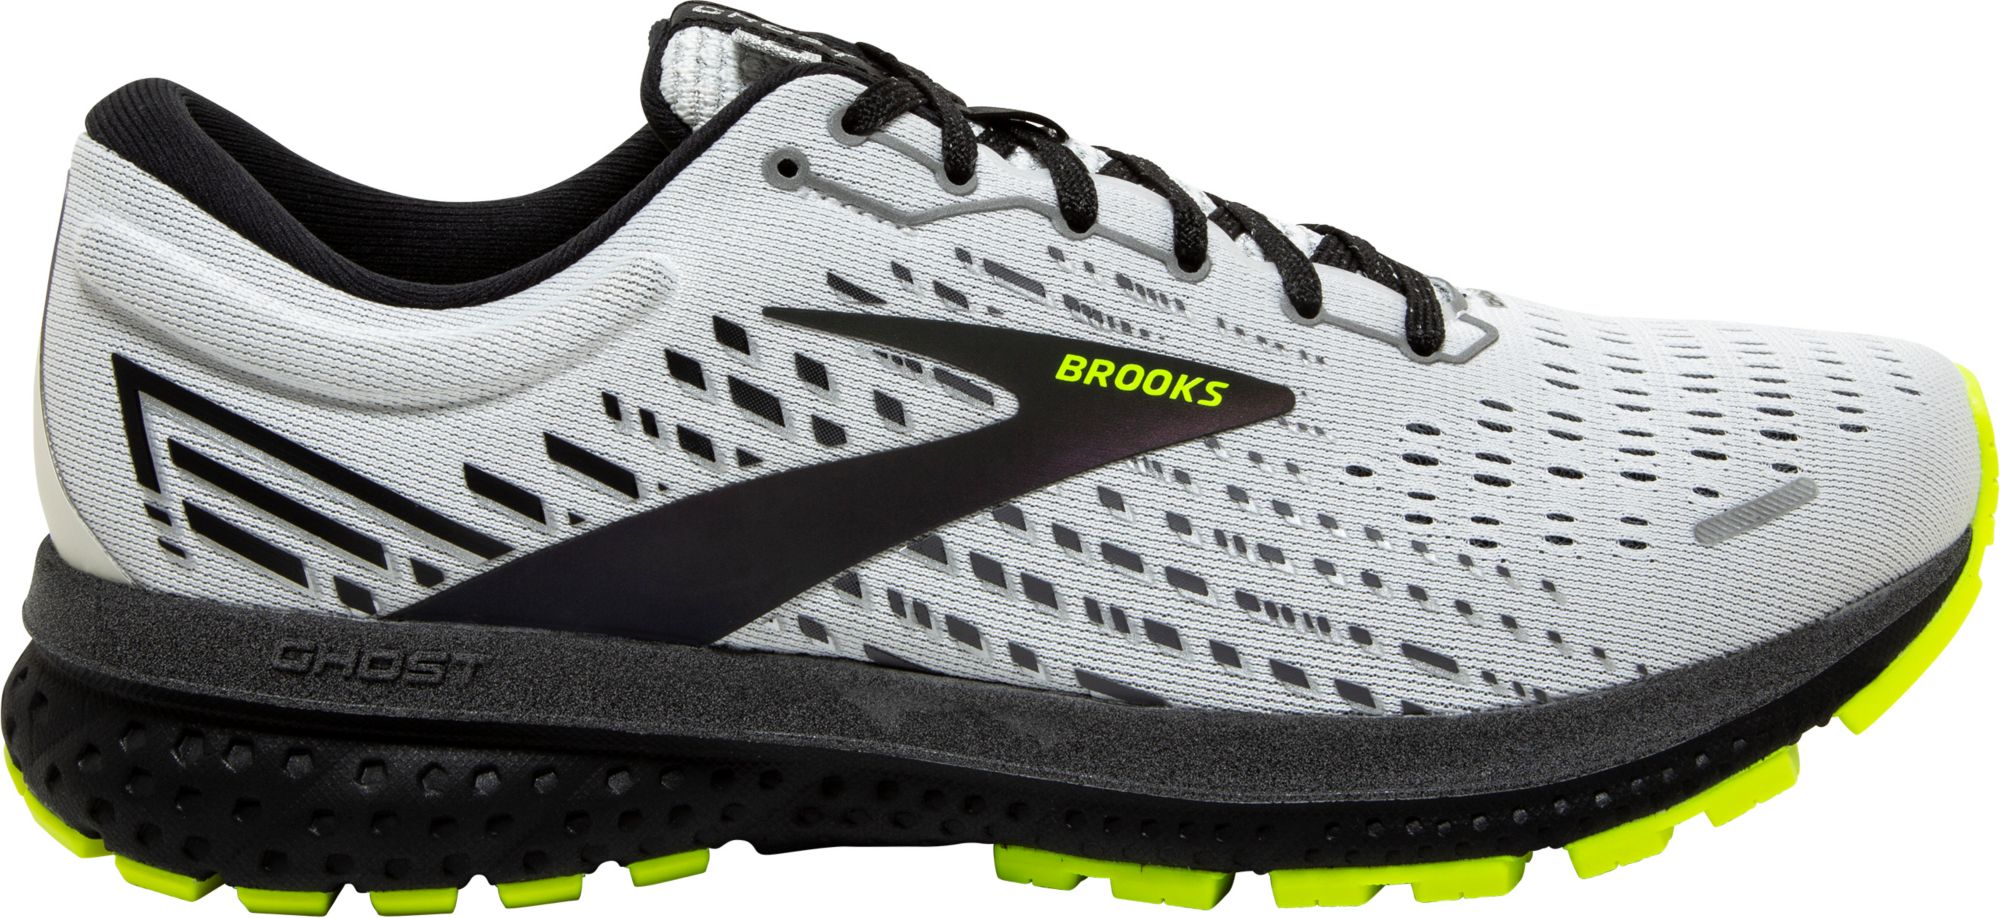 latest brooks ghost running shoes